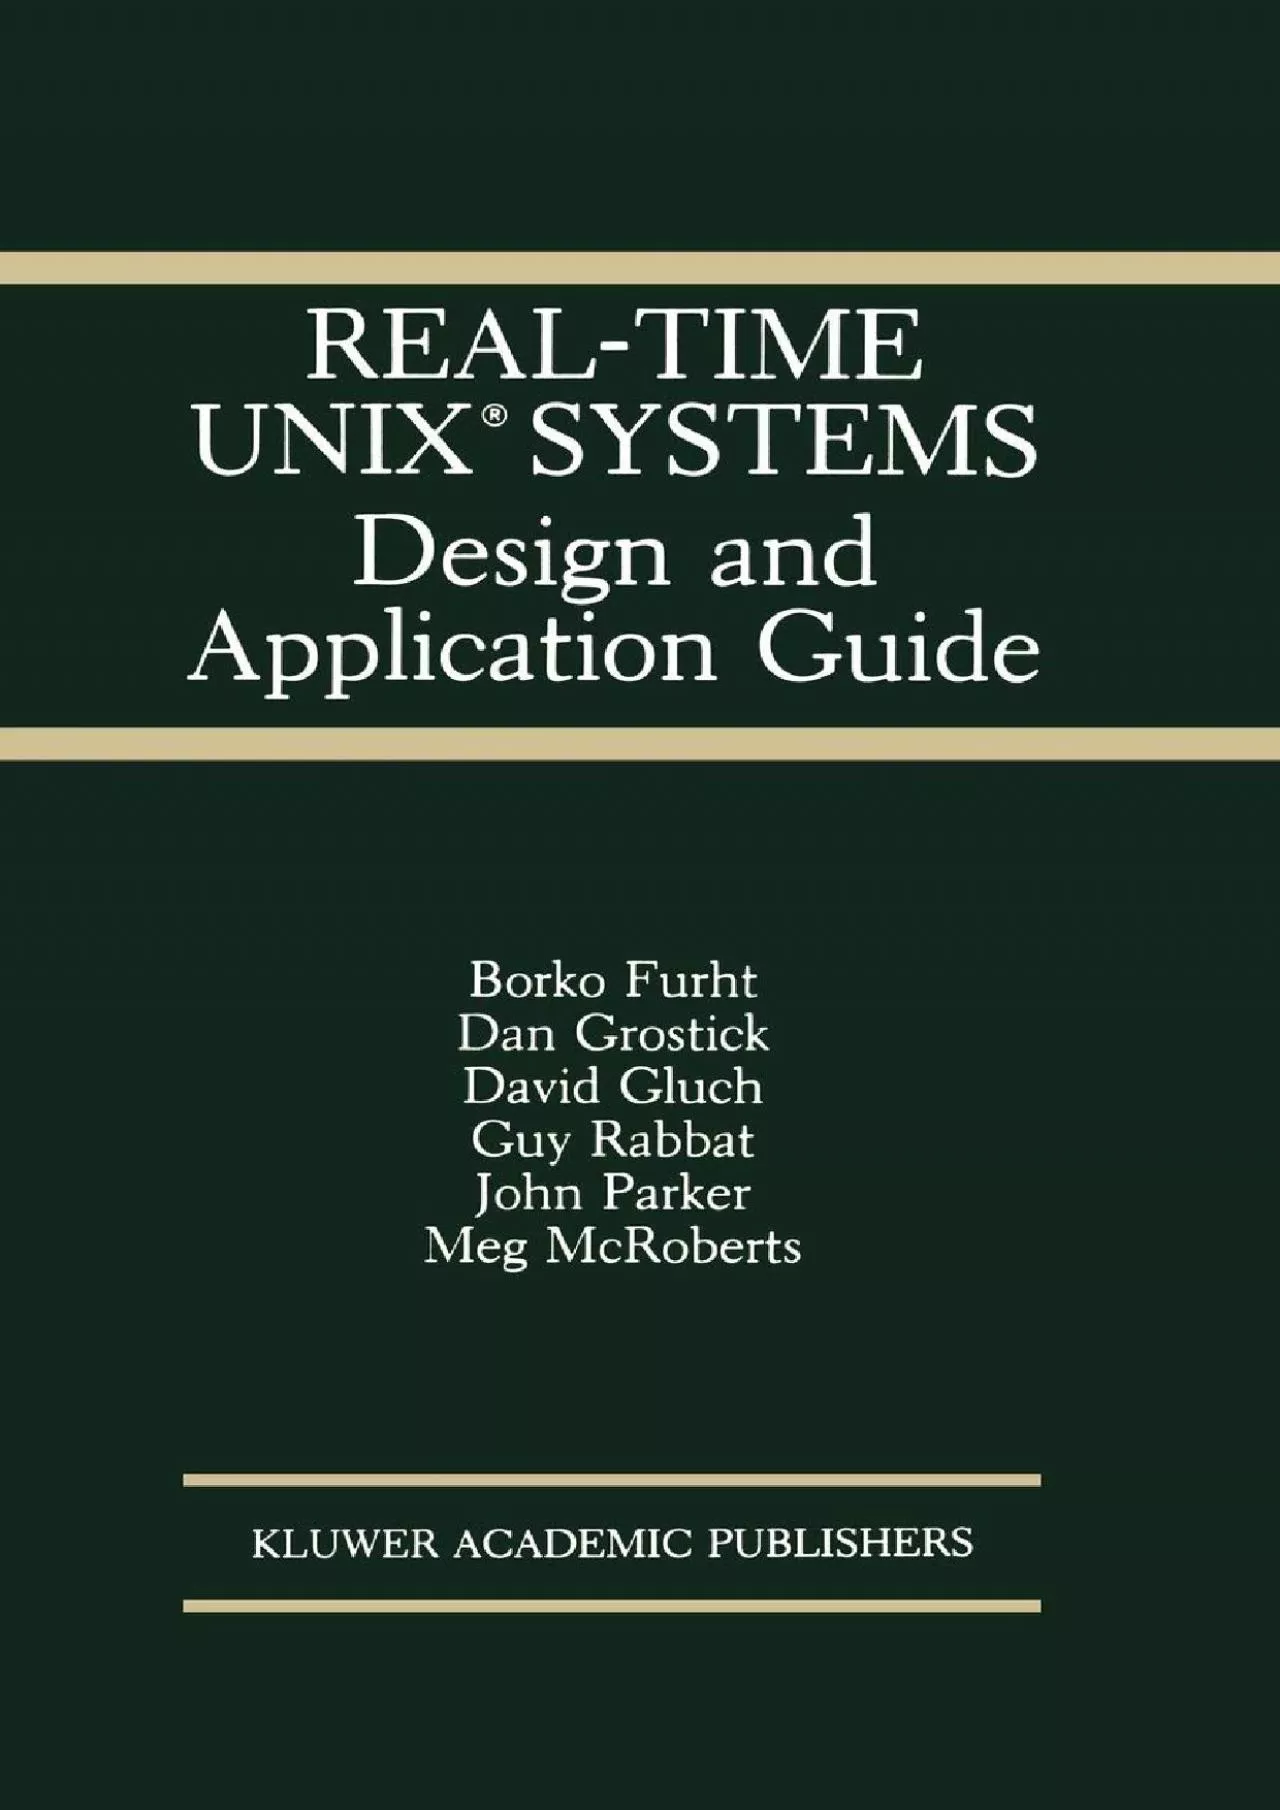 [DOWLOAD]-Real-Time UNIX® Systems: Design and Application Guide (The Springer International